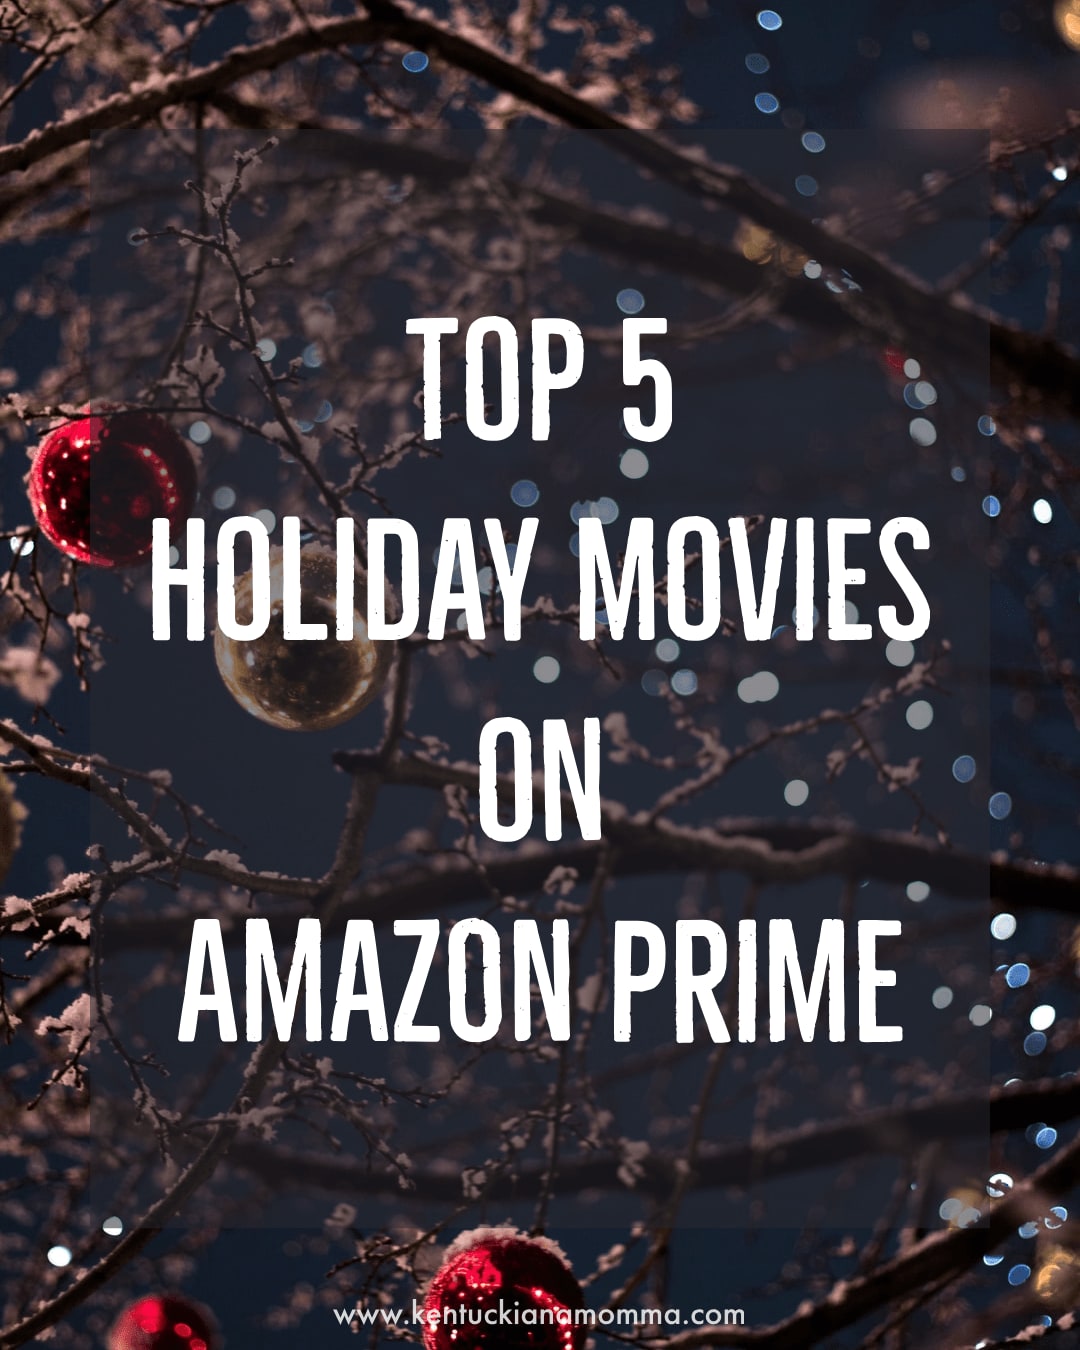 Top 5 Holiday Family Movies on Amazon Prime